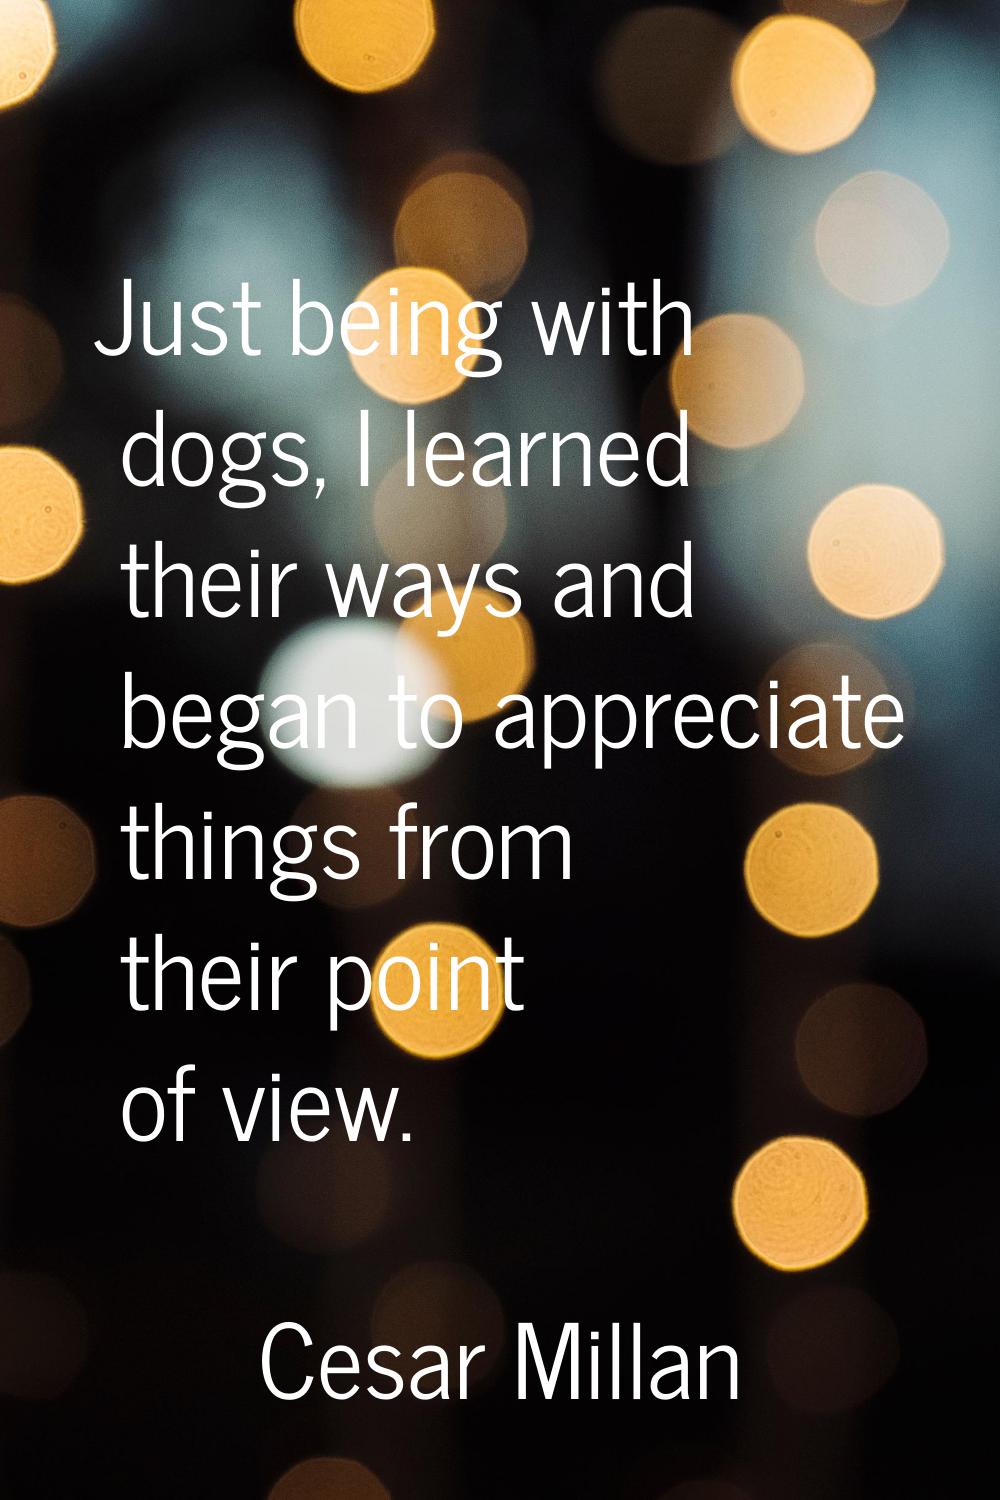 Just being with dogs, I learned their ways and began to appreciate things from their point of view.